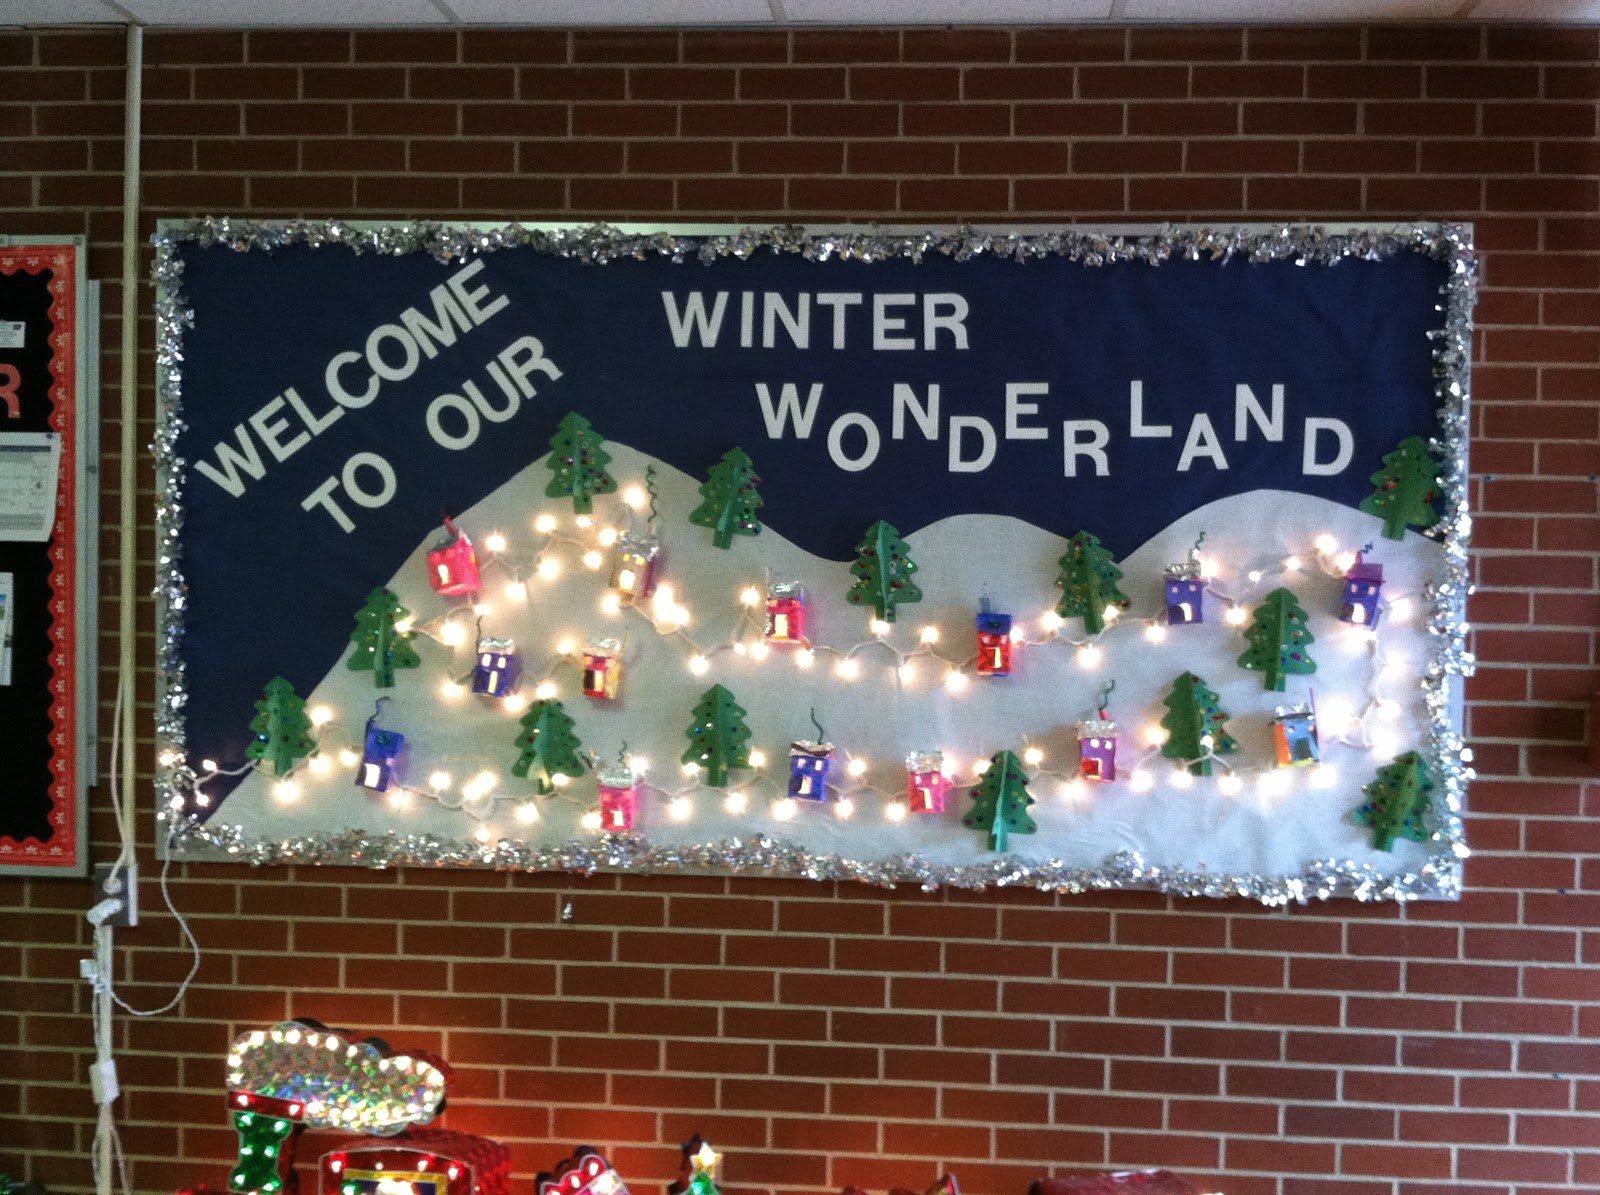 A View from a Different Angle My Kindergarten's Winter Wonderland